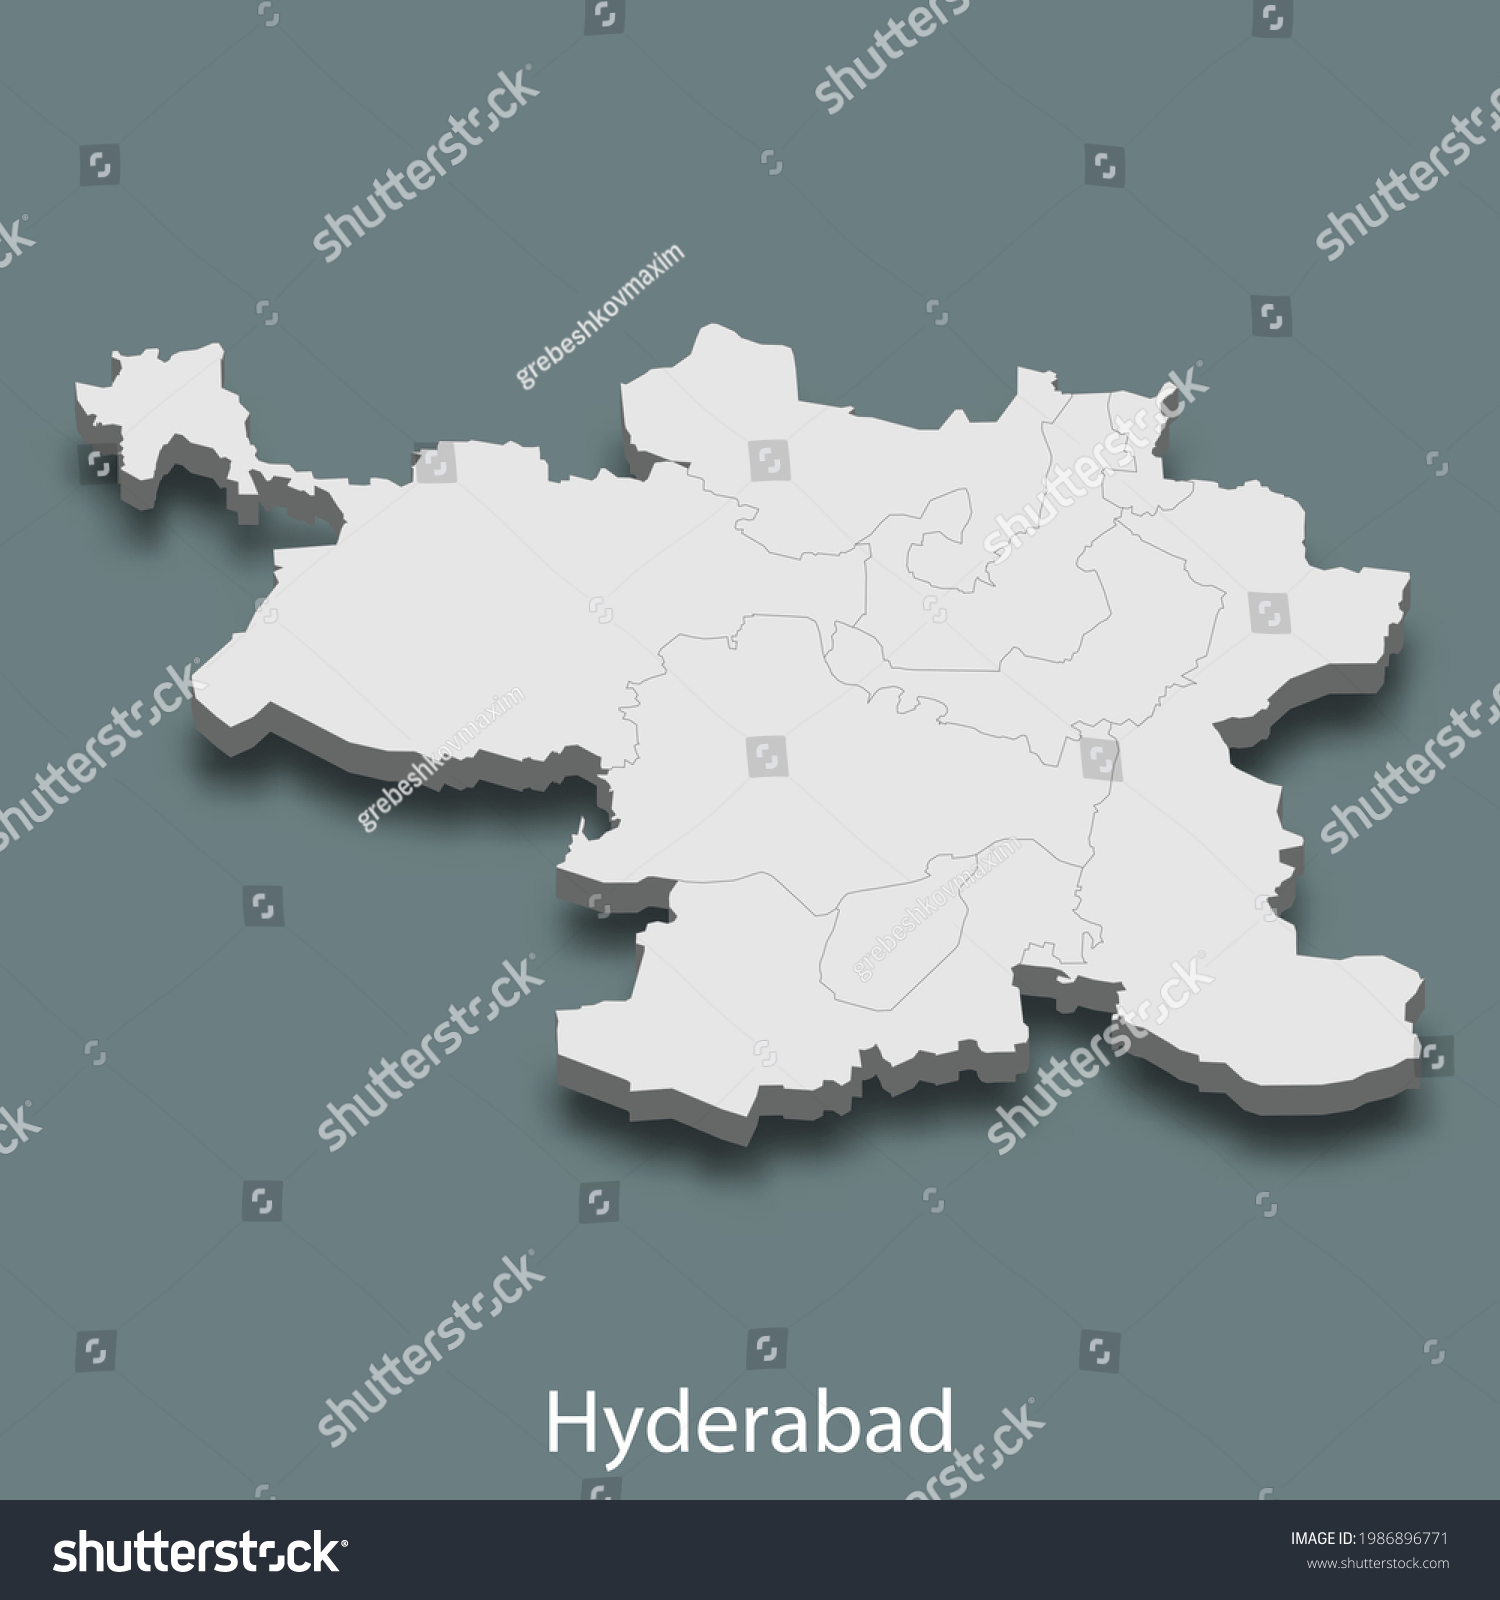 3d Isometric Map Hyderabad City India Stock Vector (Royalty Free ...